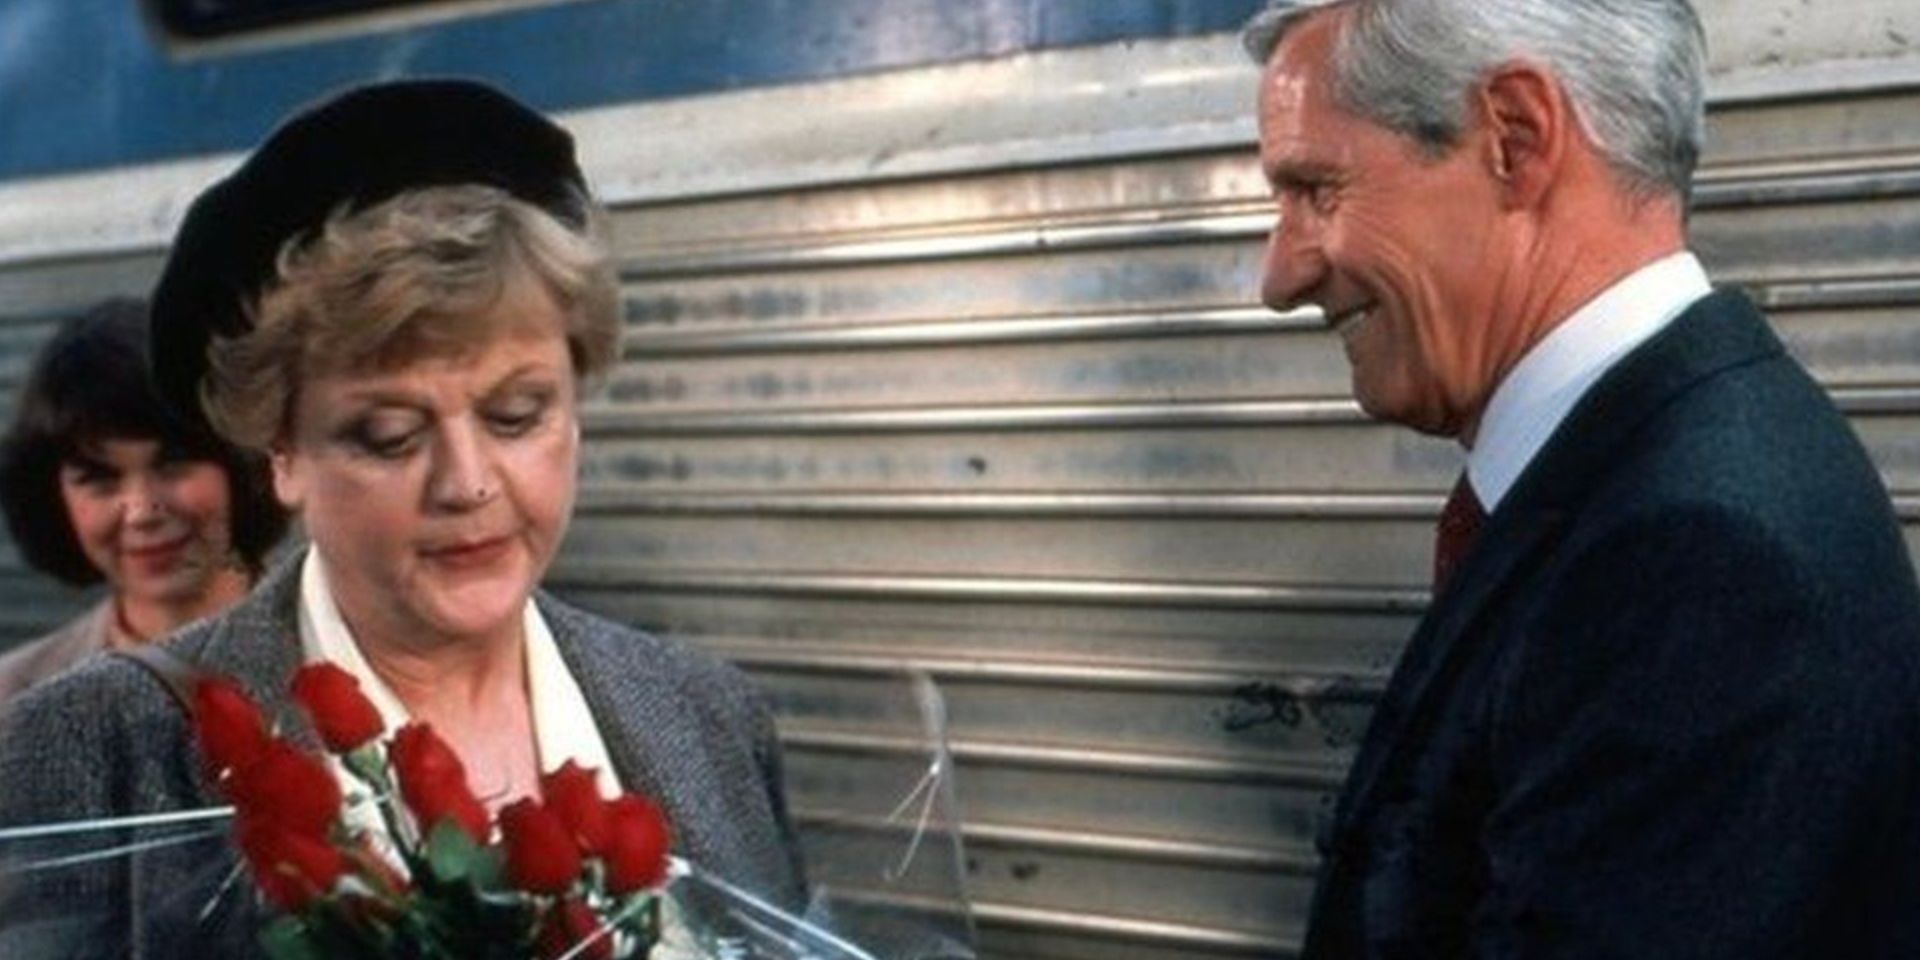 Jessica receives flowers in the Murder, She Wrote pilot episode